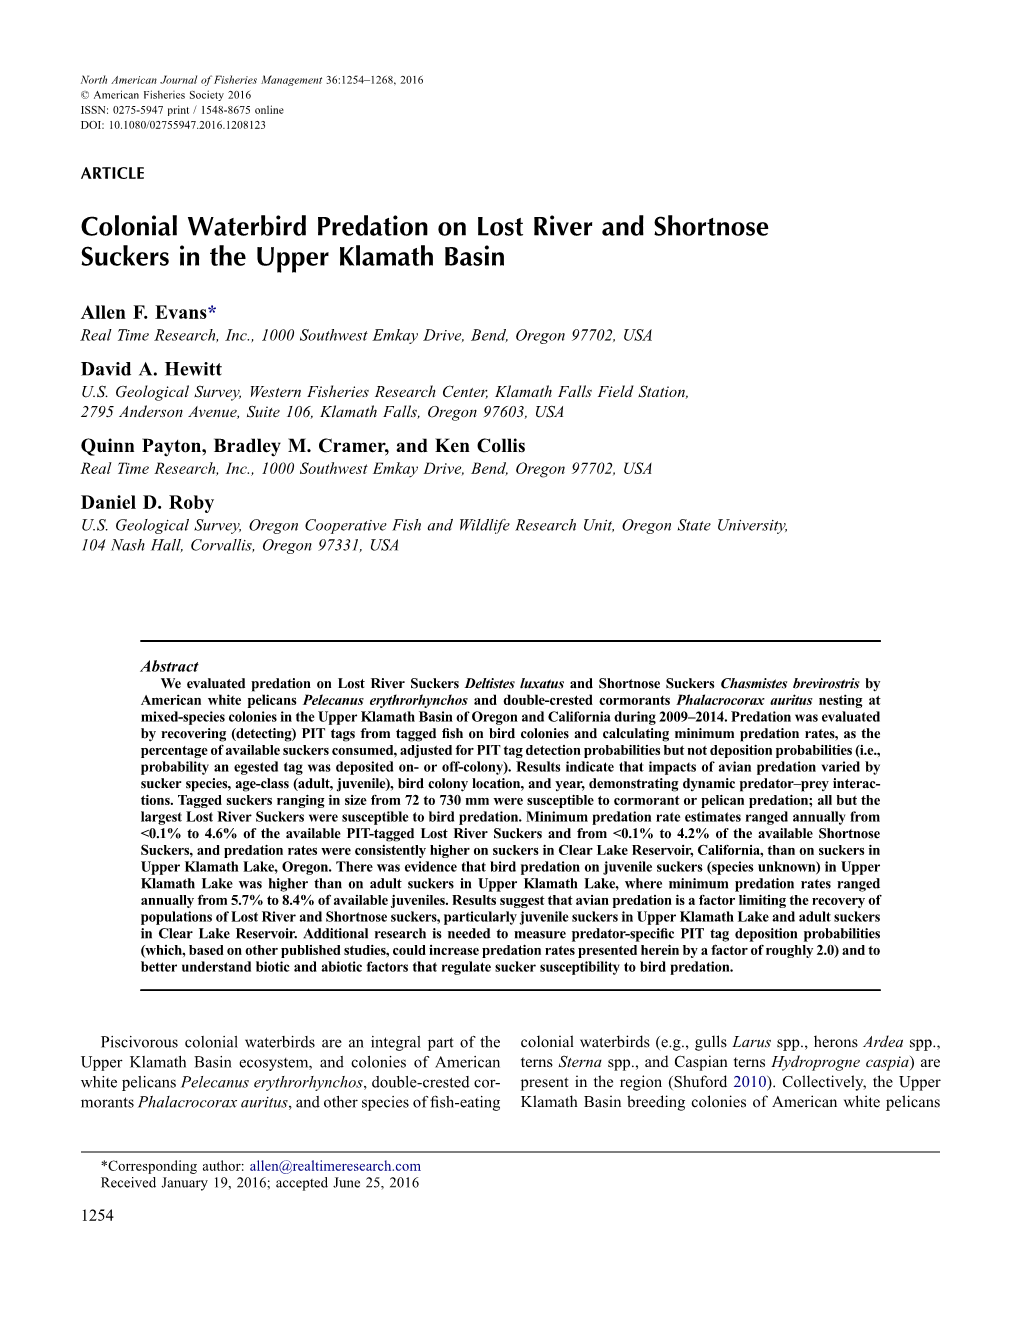 Colonial Waterbird Predation on Lost River and Shortnose Suckers in the Upper Klamath Basin